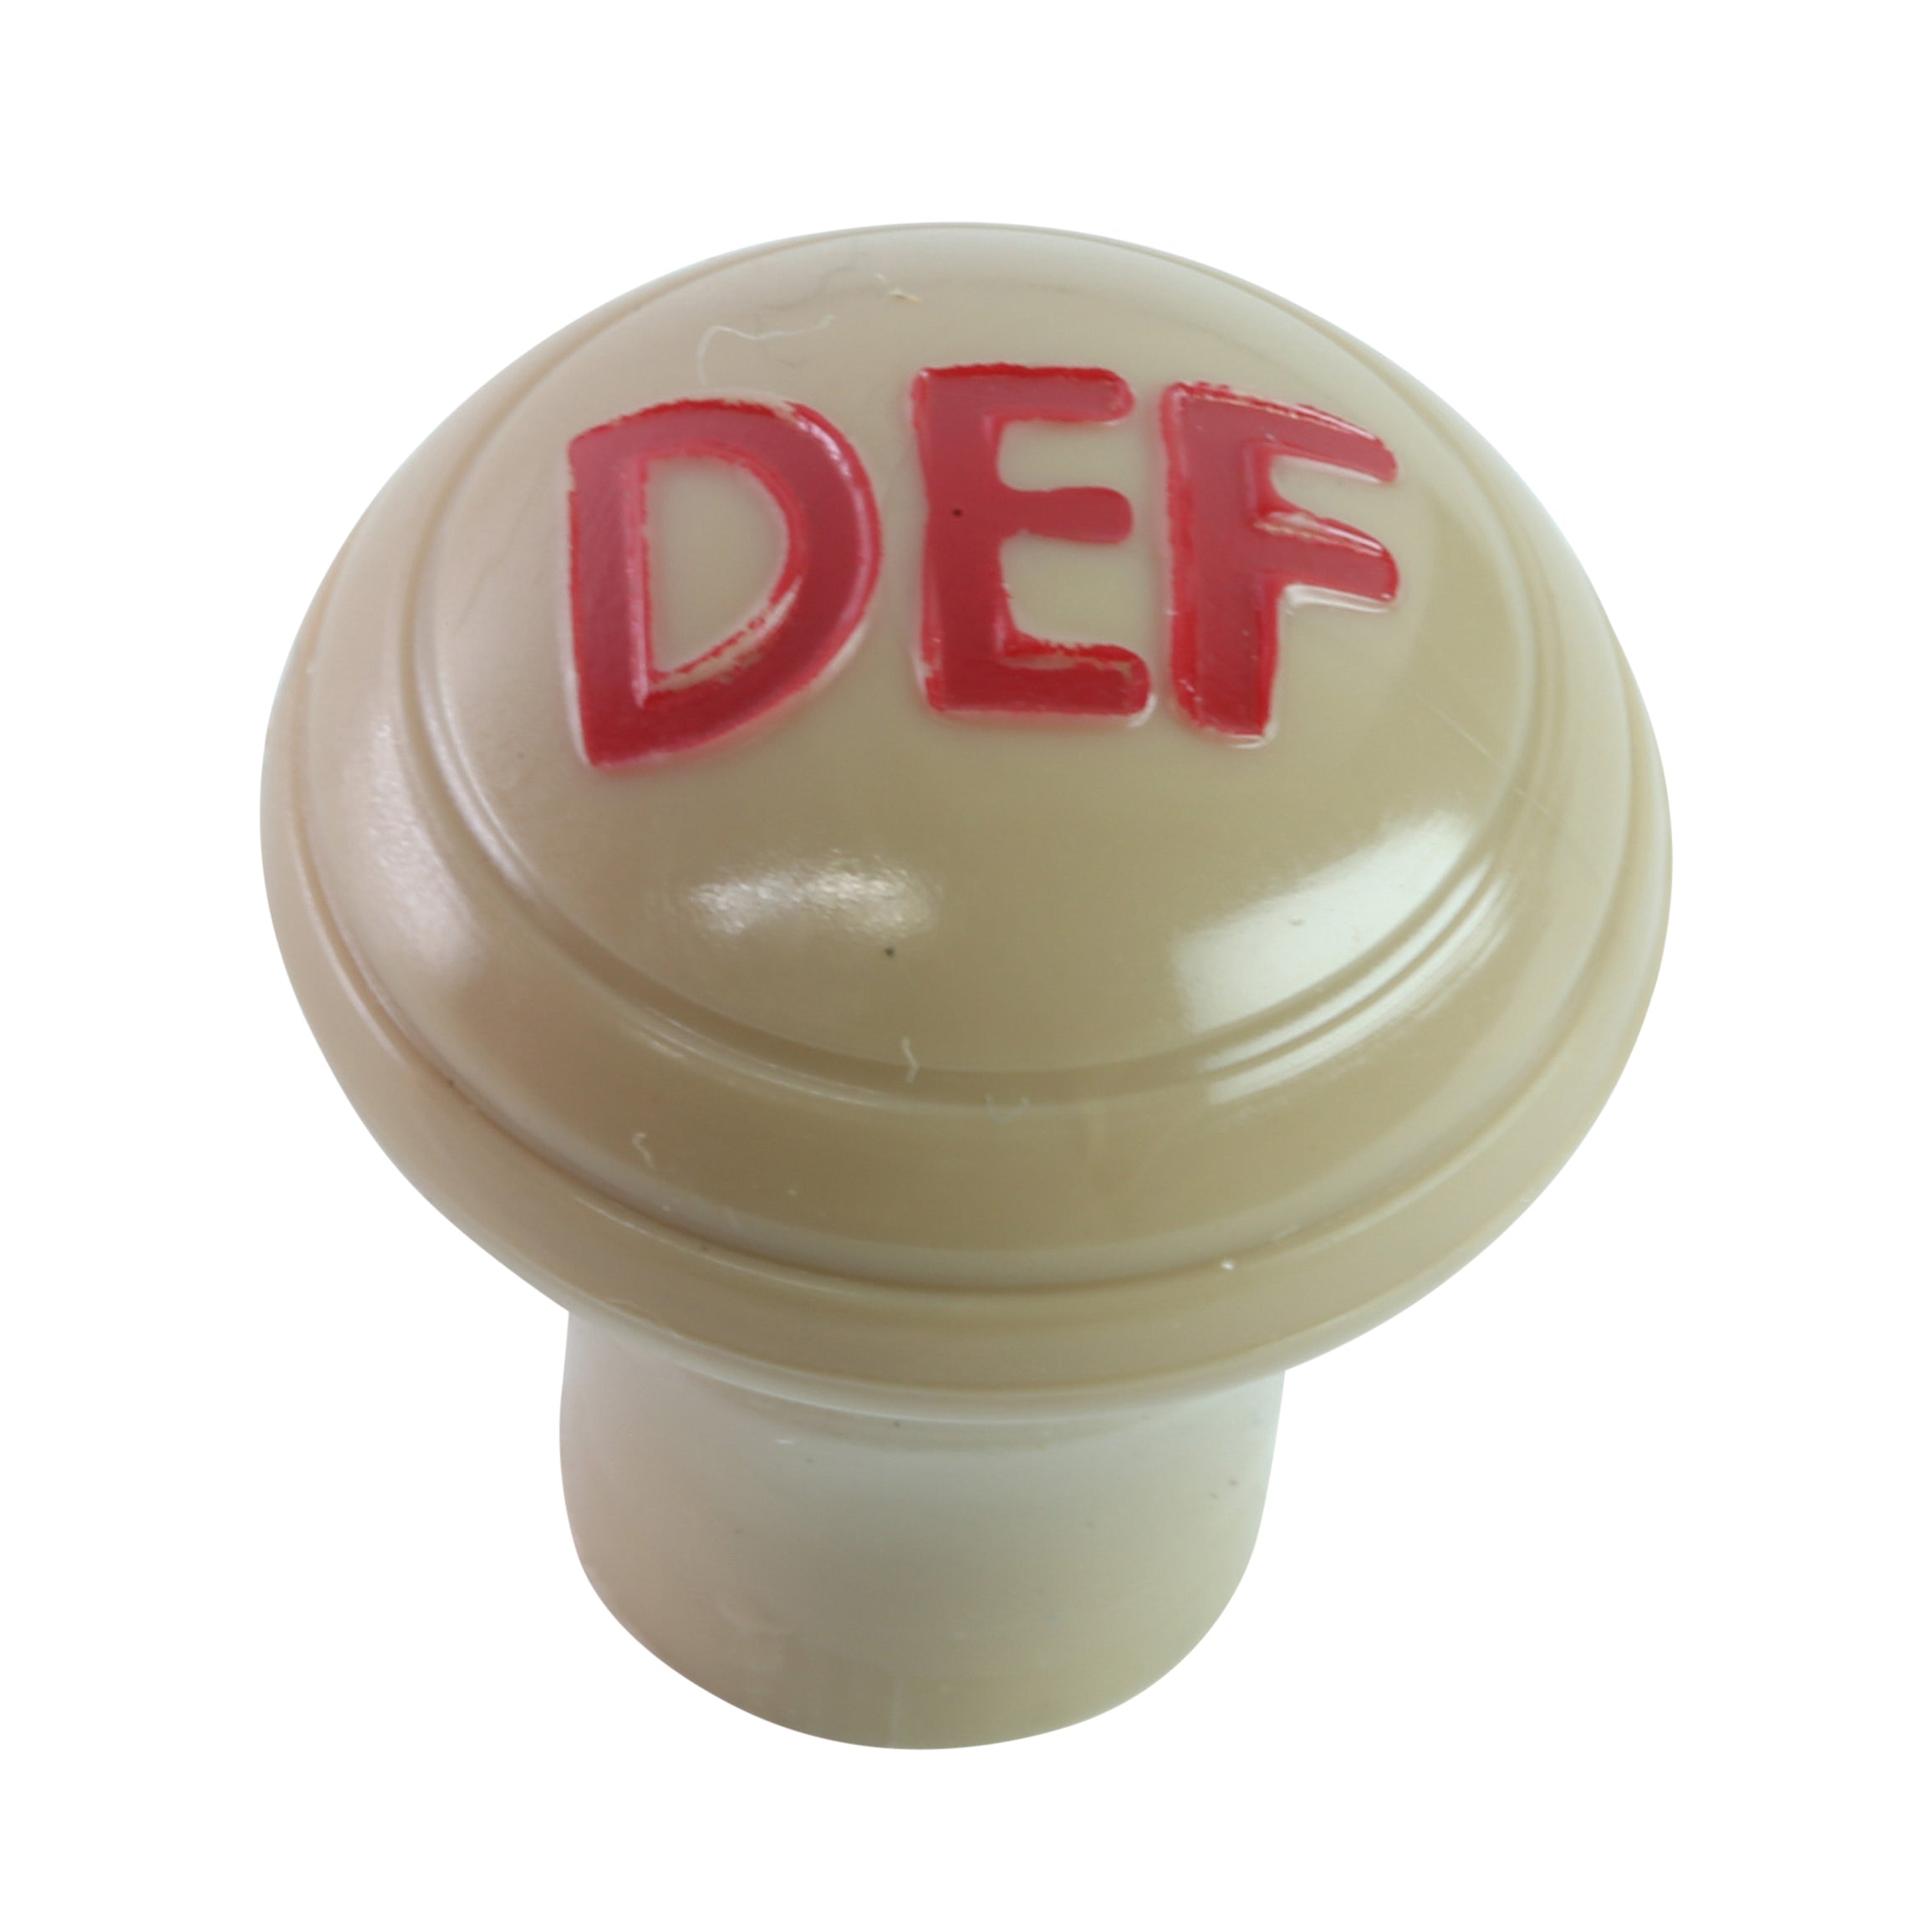 Hot Water Heater Defroster Knob • 1941 Ford